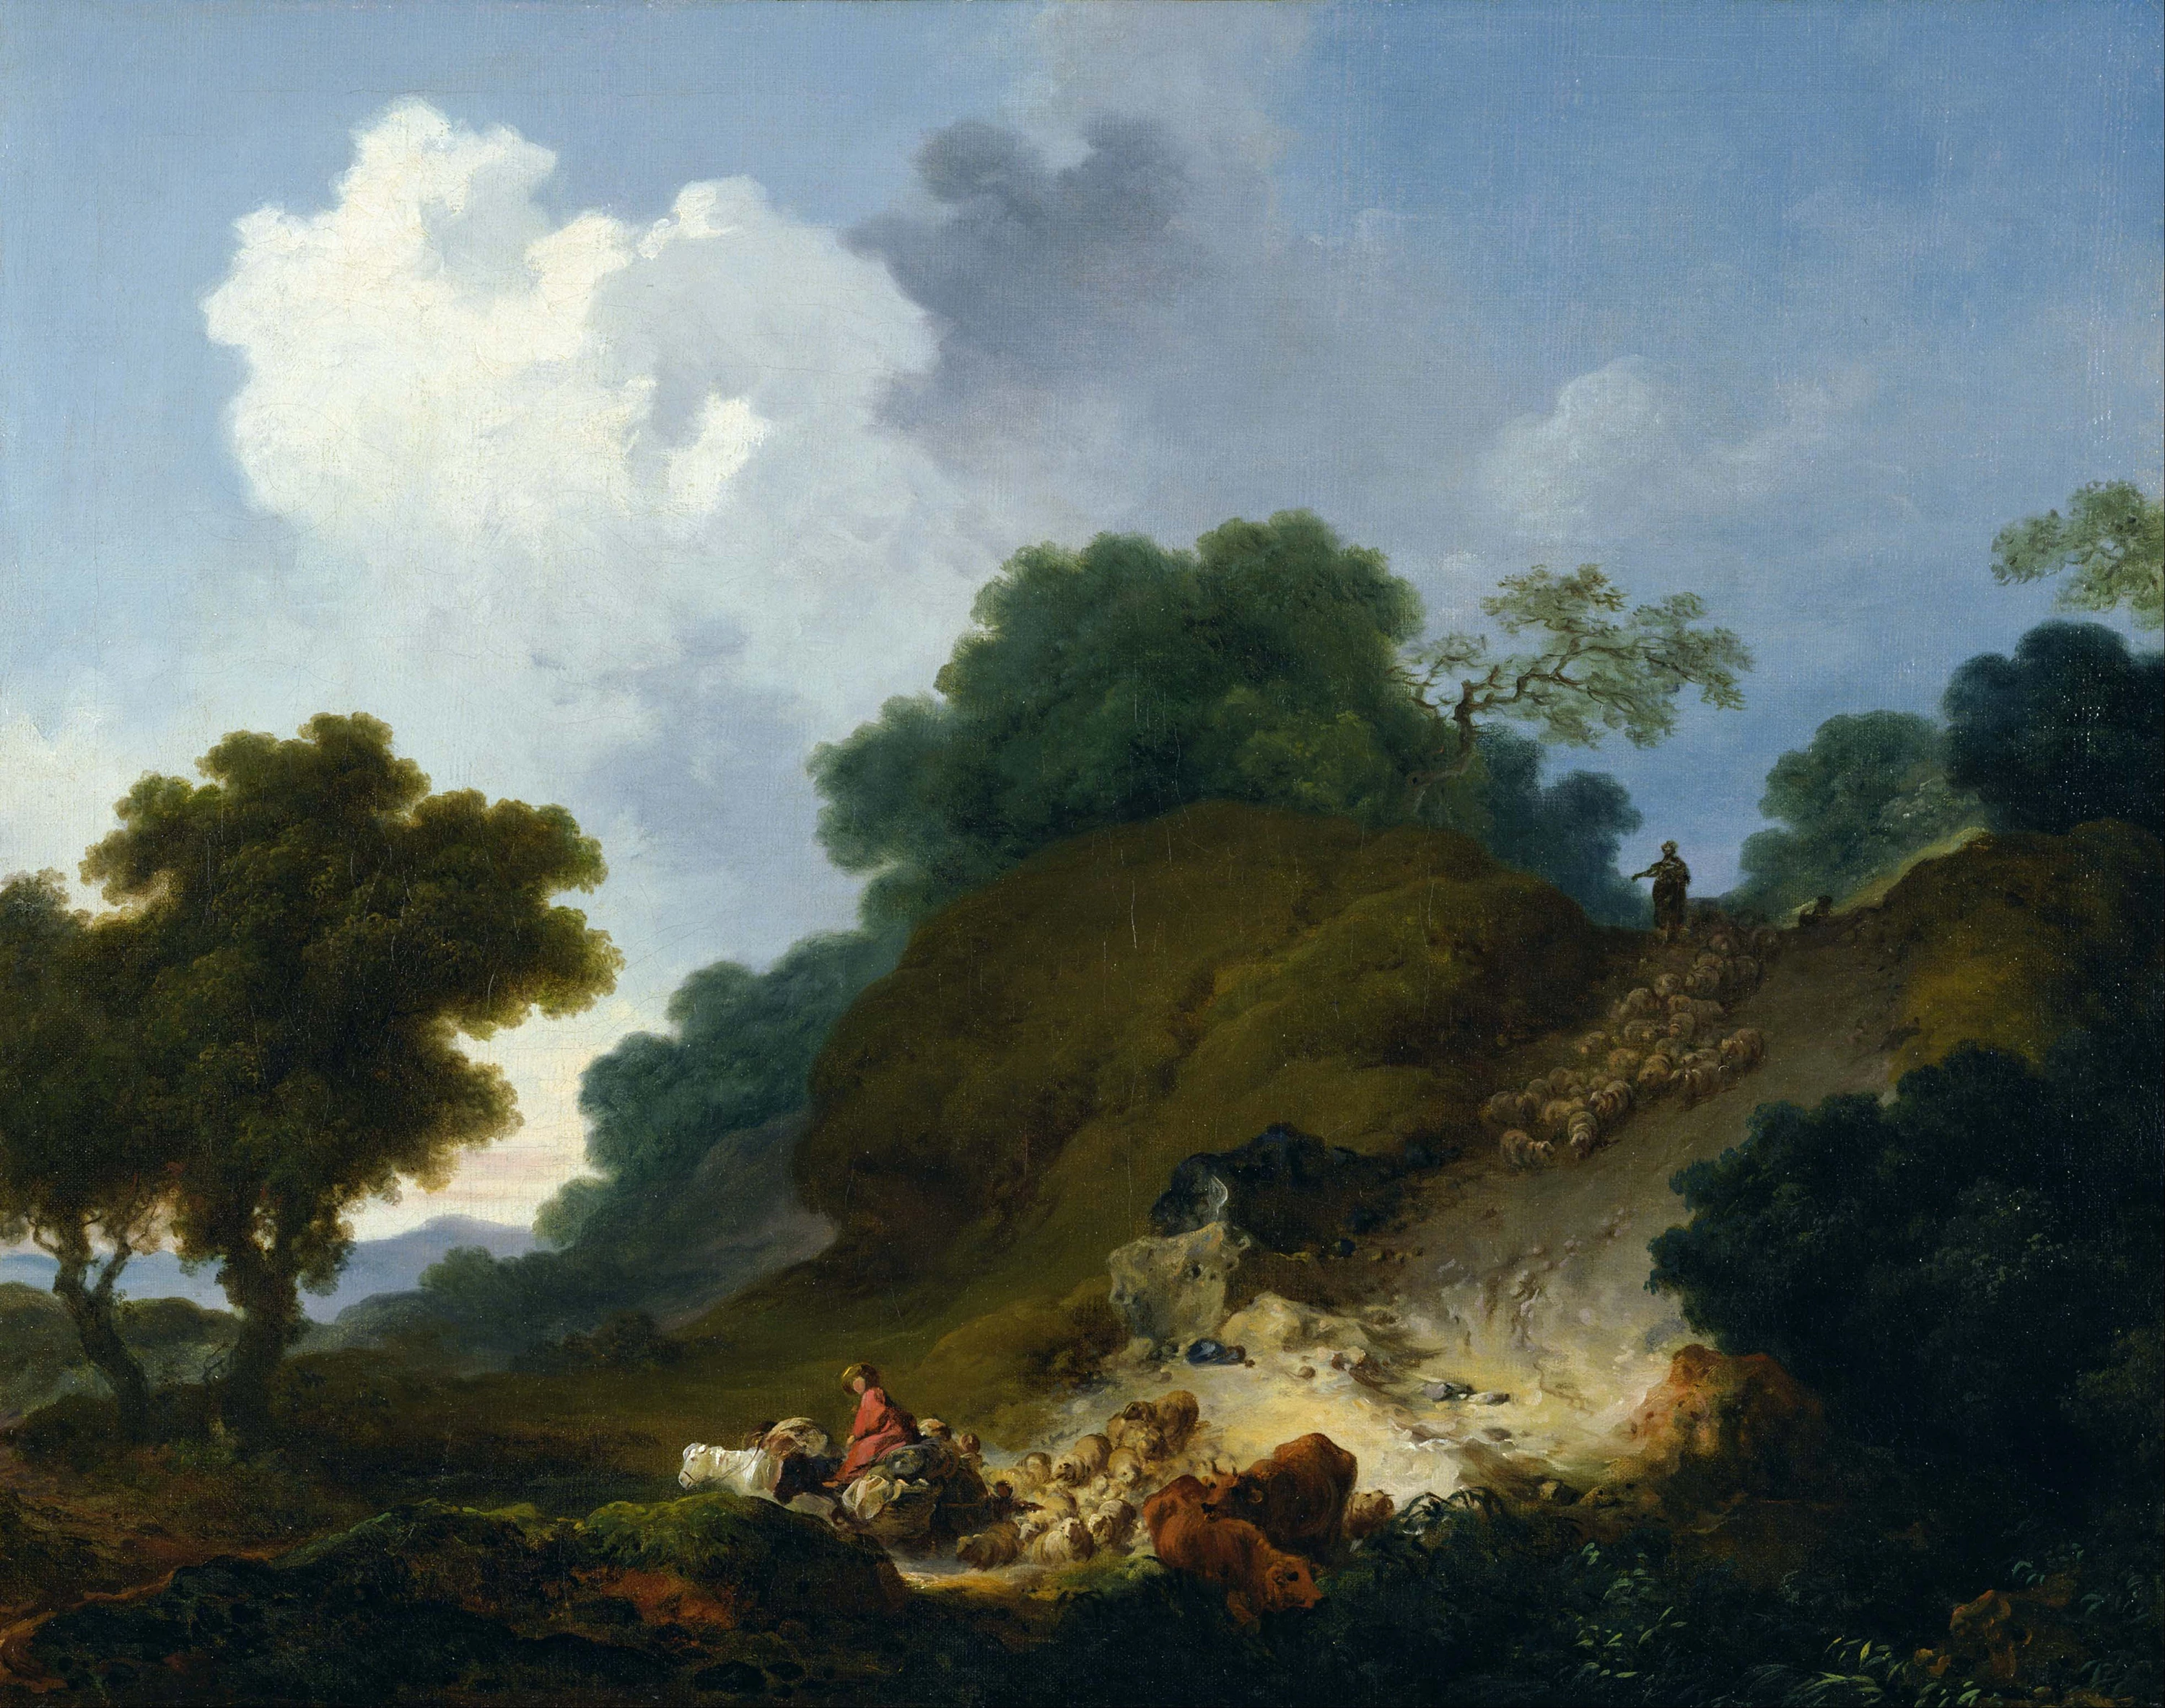 Landscape with Shepherds and Flock of Sheep, Jean-Honoré Fragonard